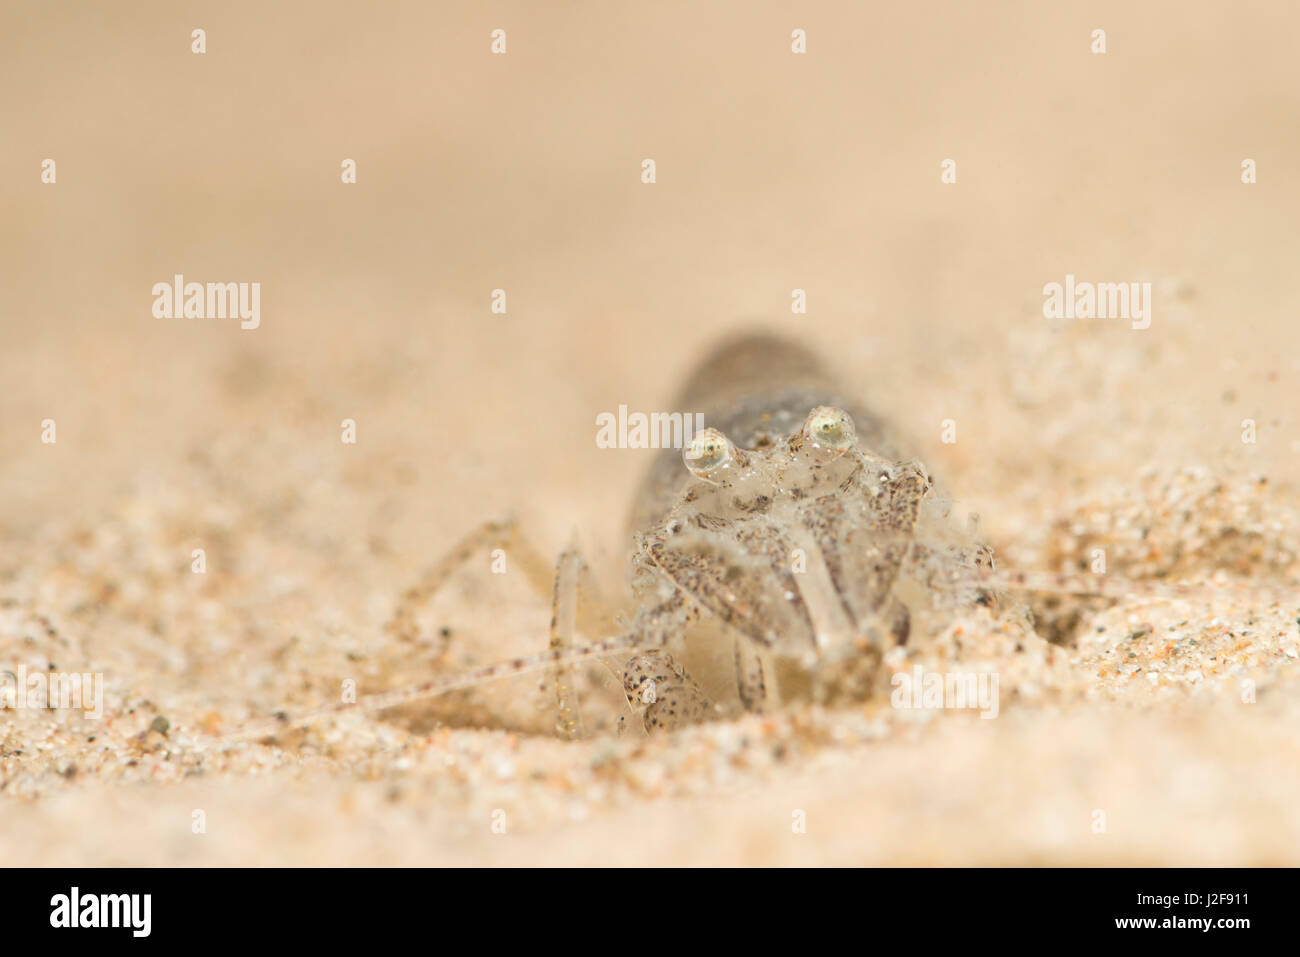 Brown shrimp in frontal view Stock Photo